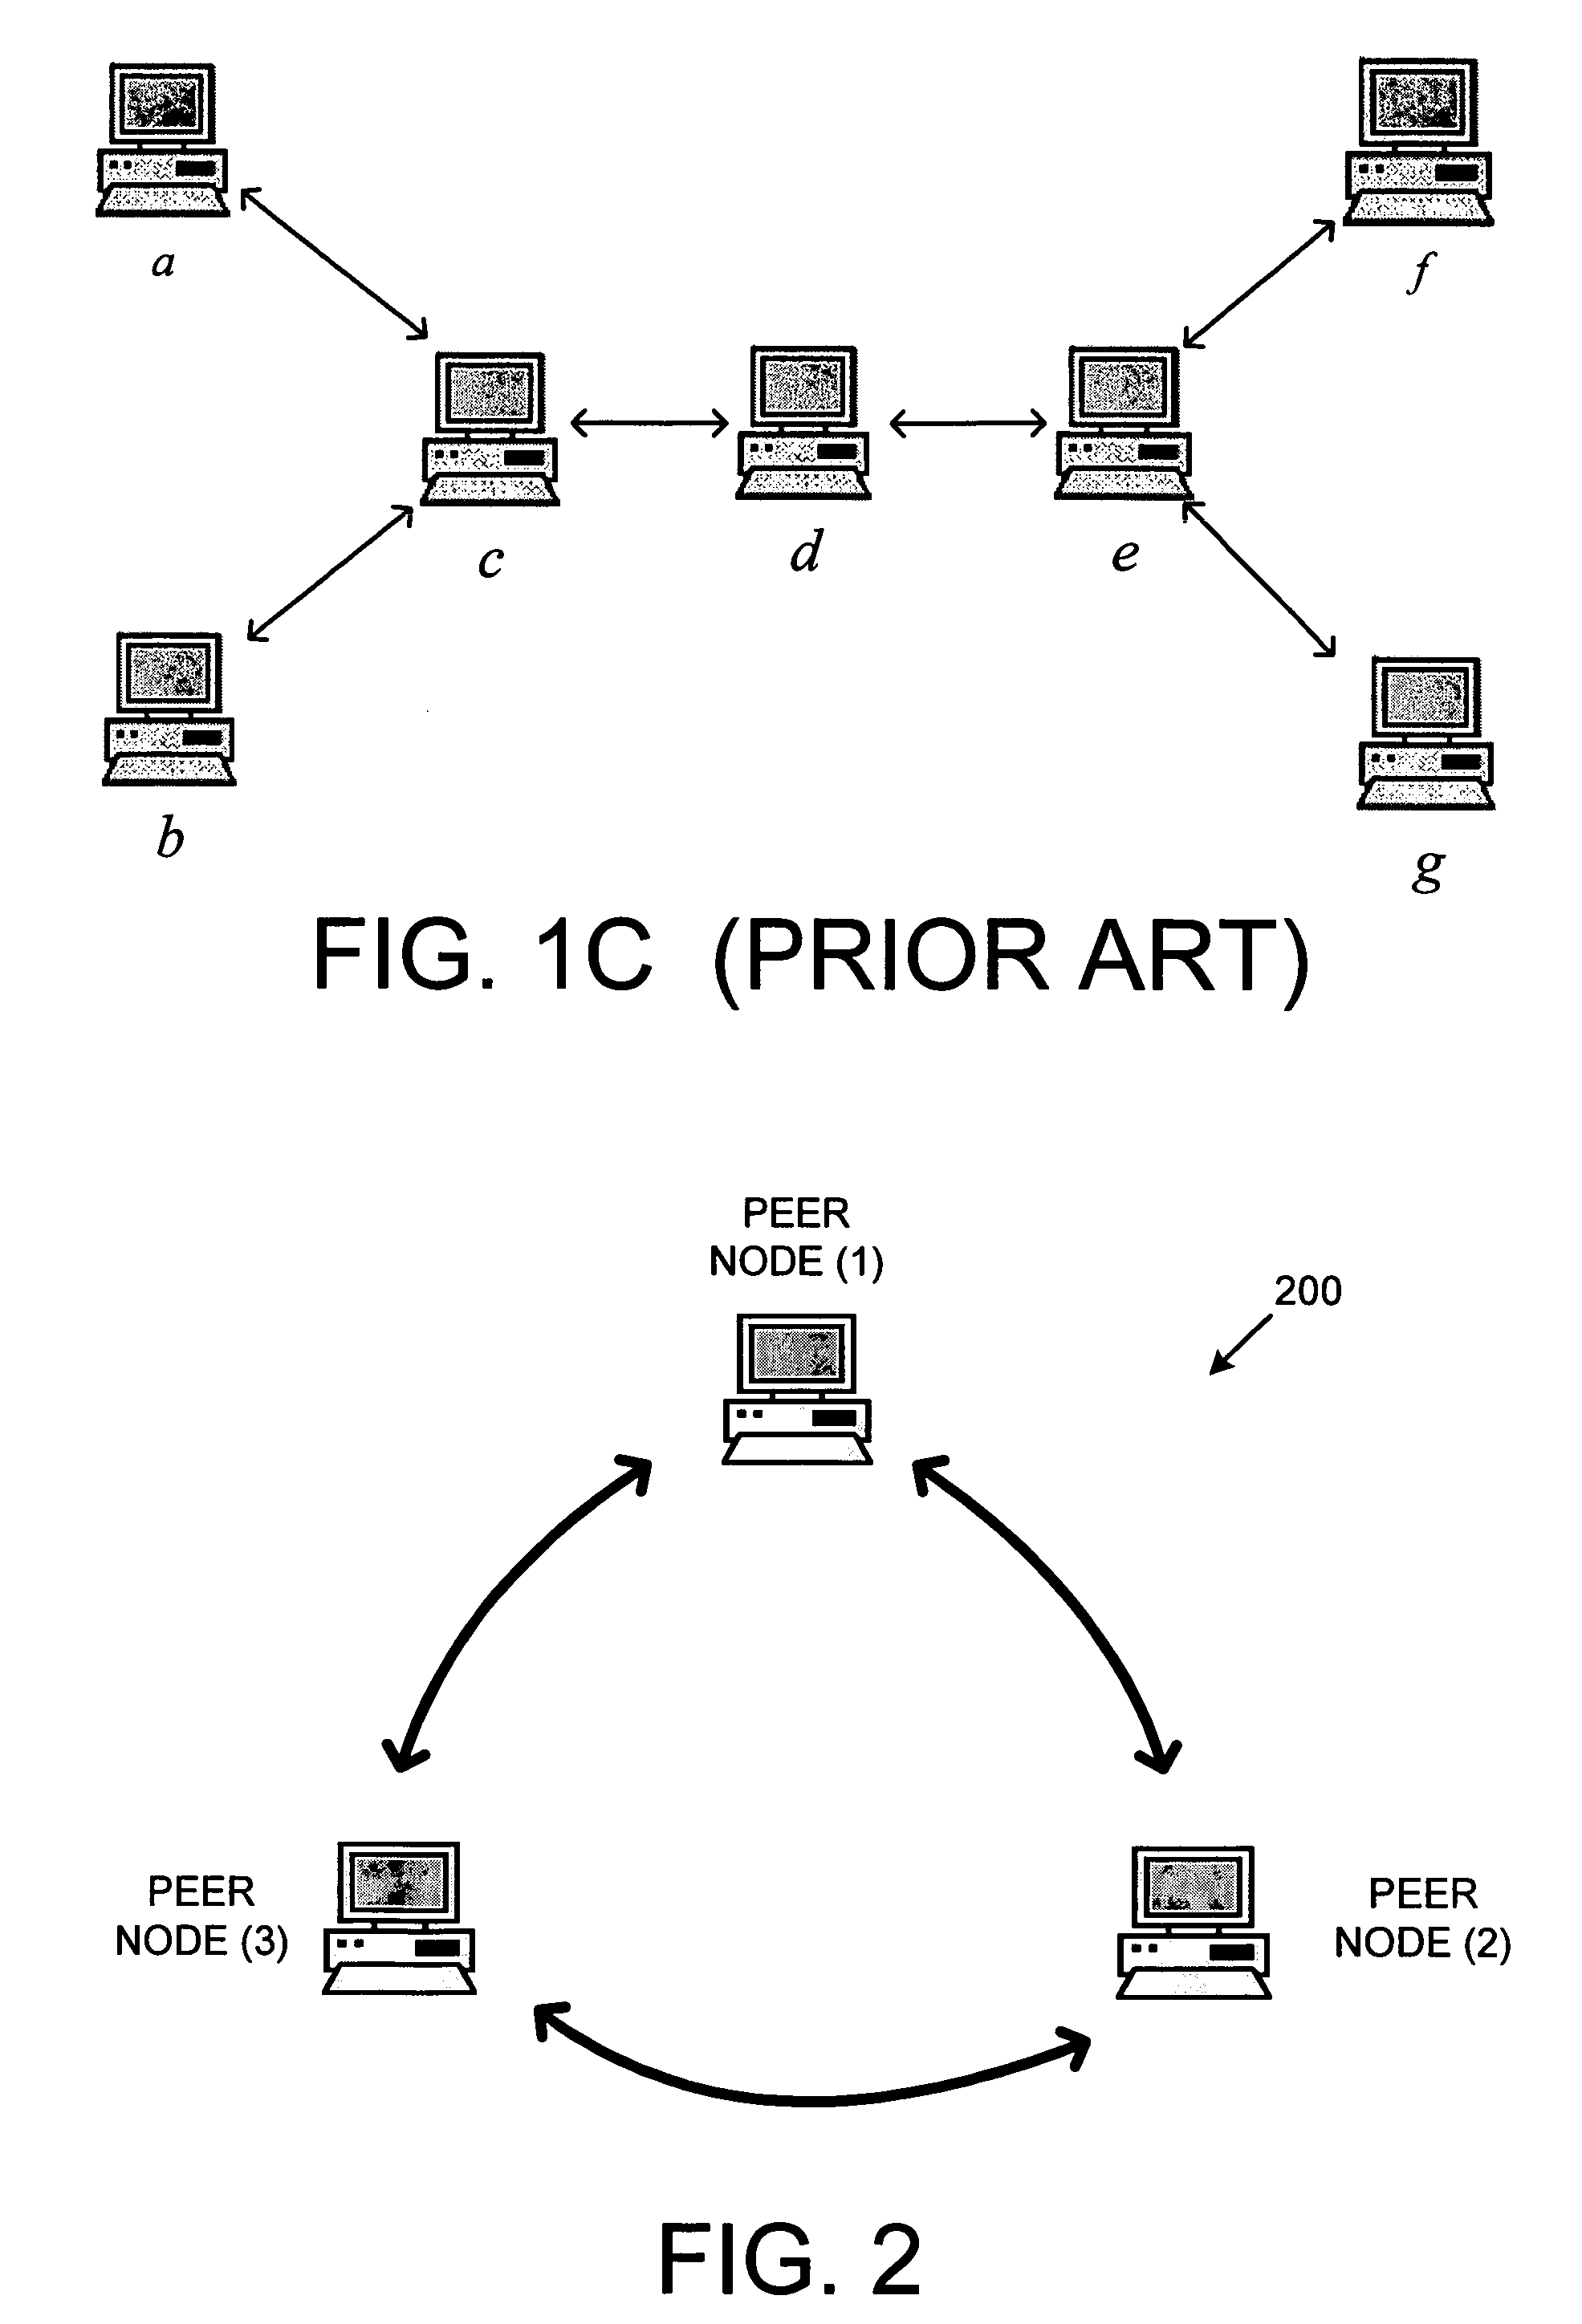 Serverless peer-to-peer multi-party real-time audio communication system and method